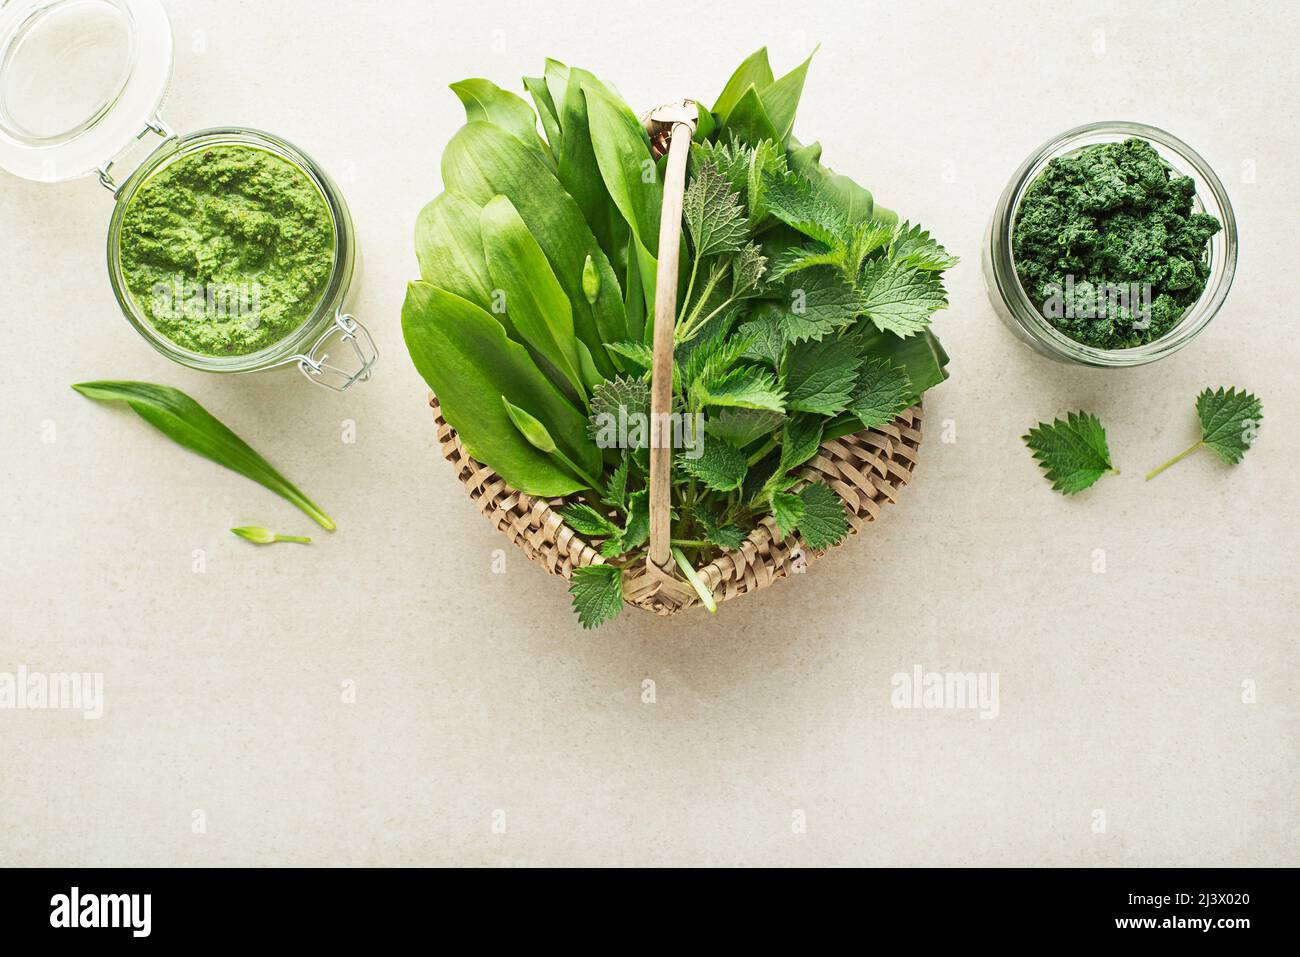 Spring healthy food. Nettle and ramson pesto for healthy meal on grey background Stock Photo